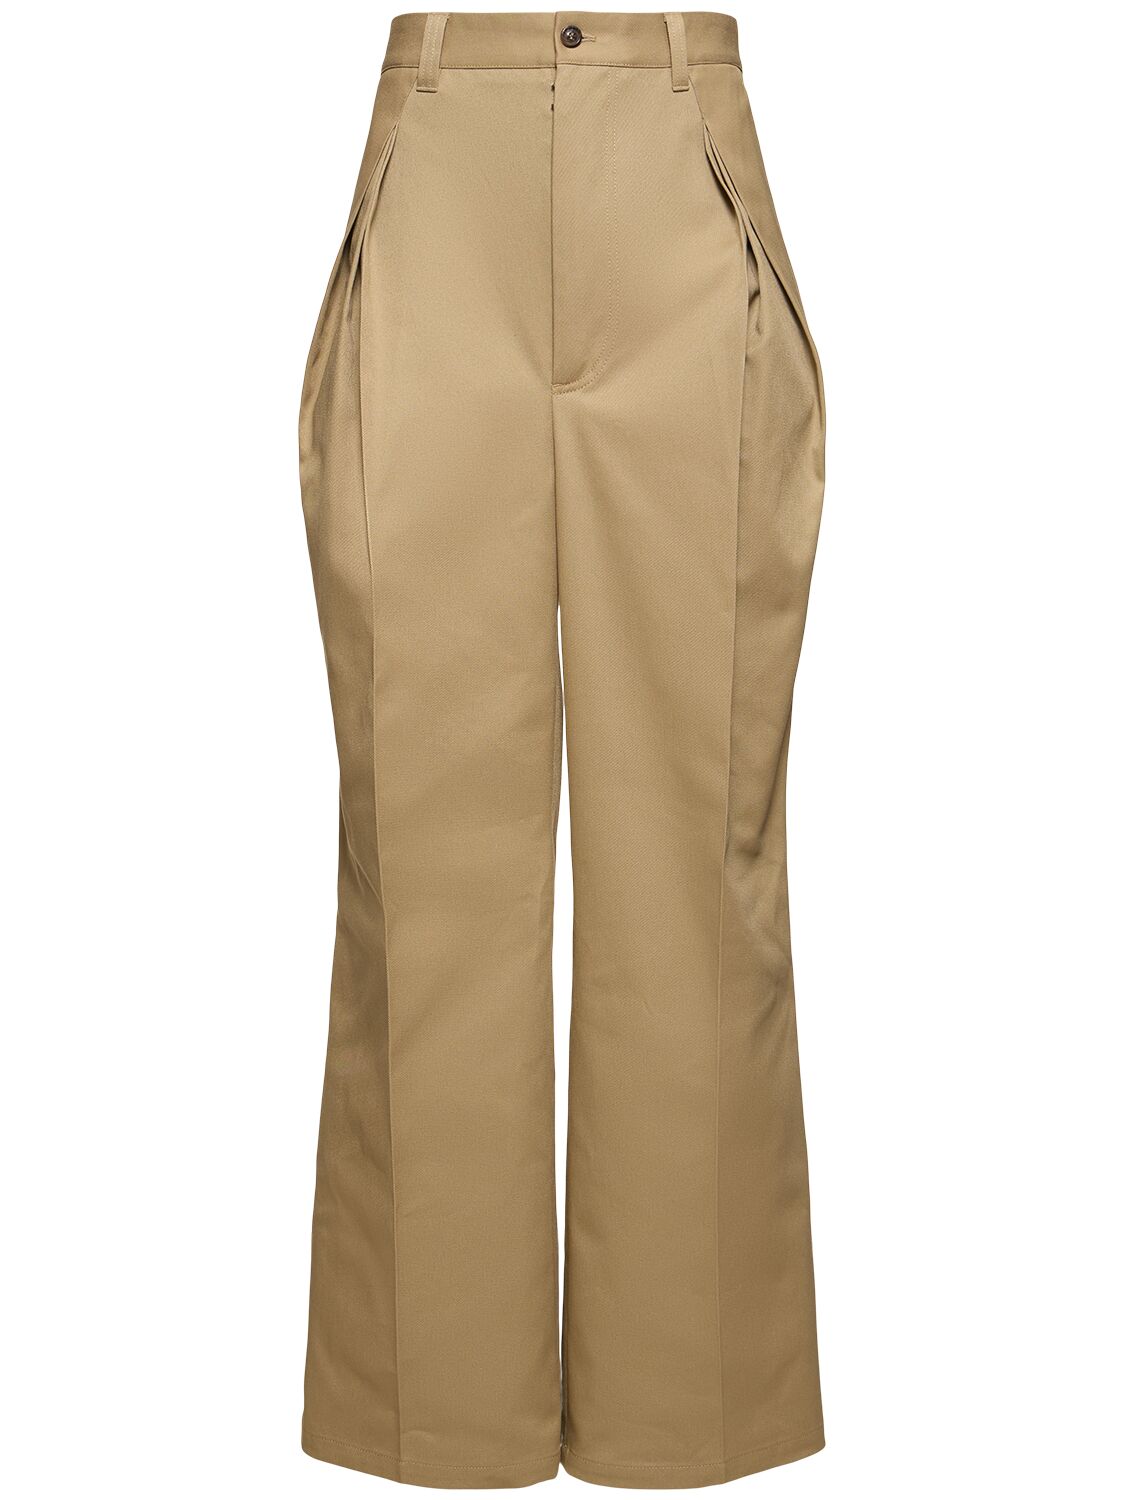 Image of Pleated Cotton Blend Chino Pants